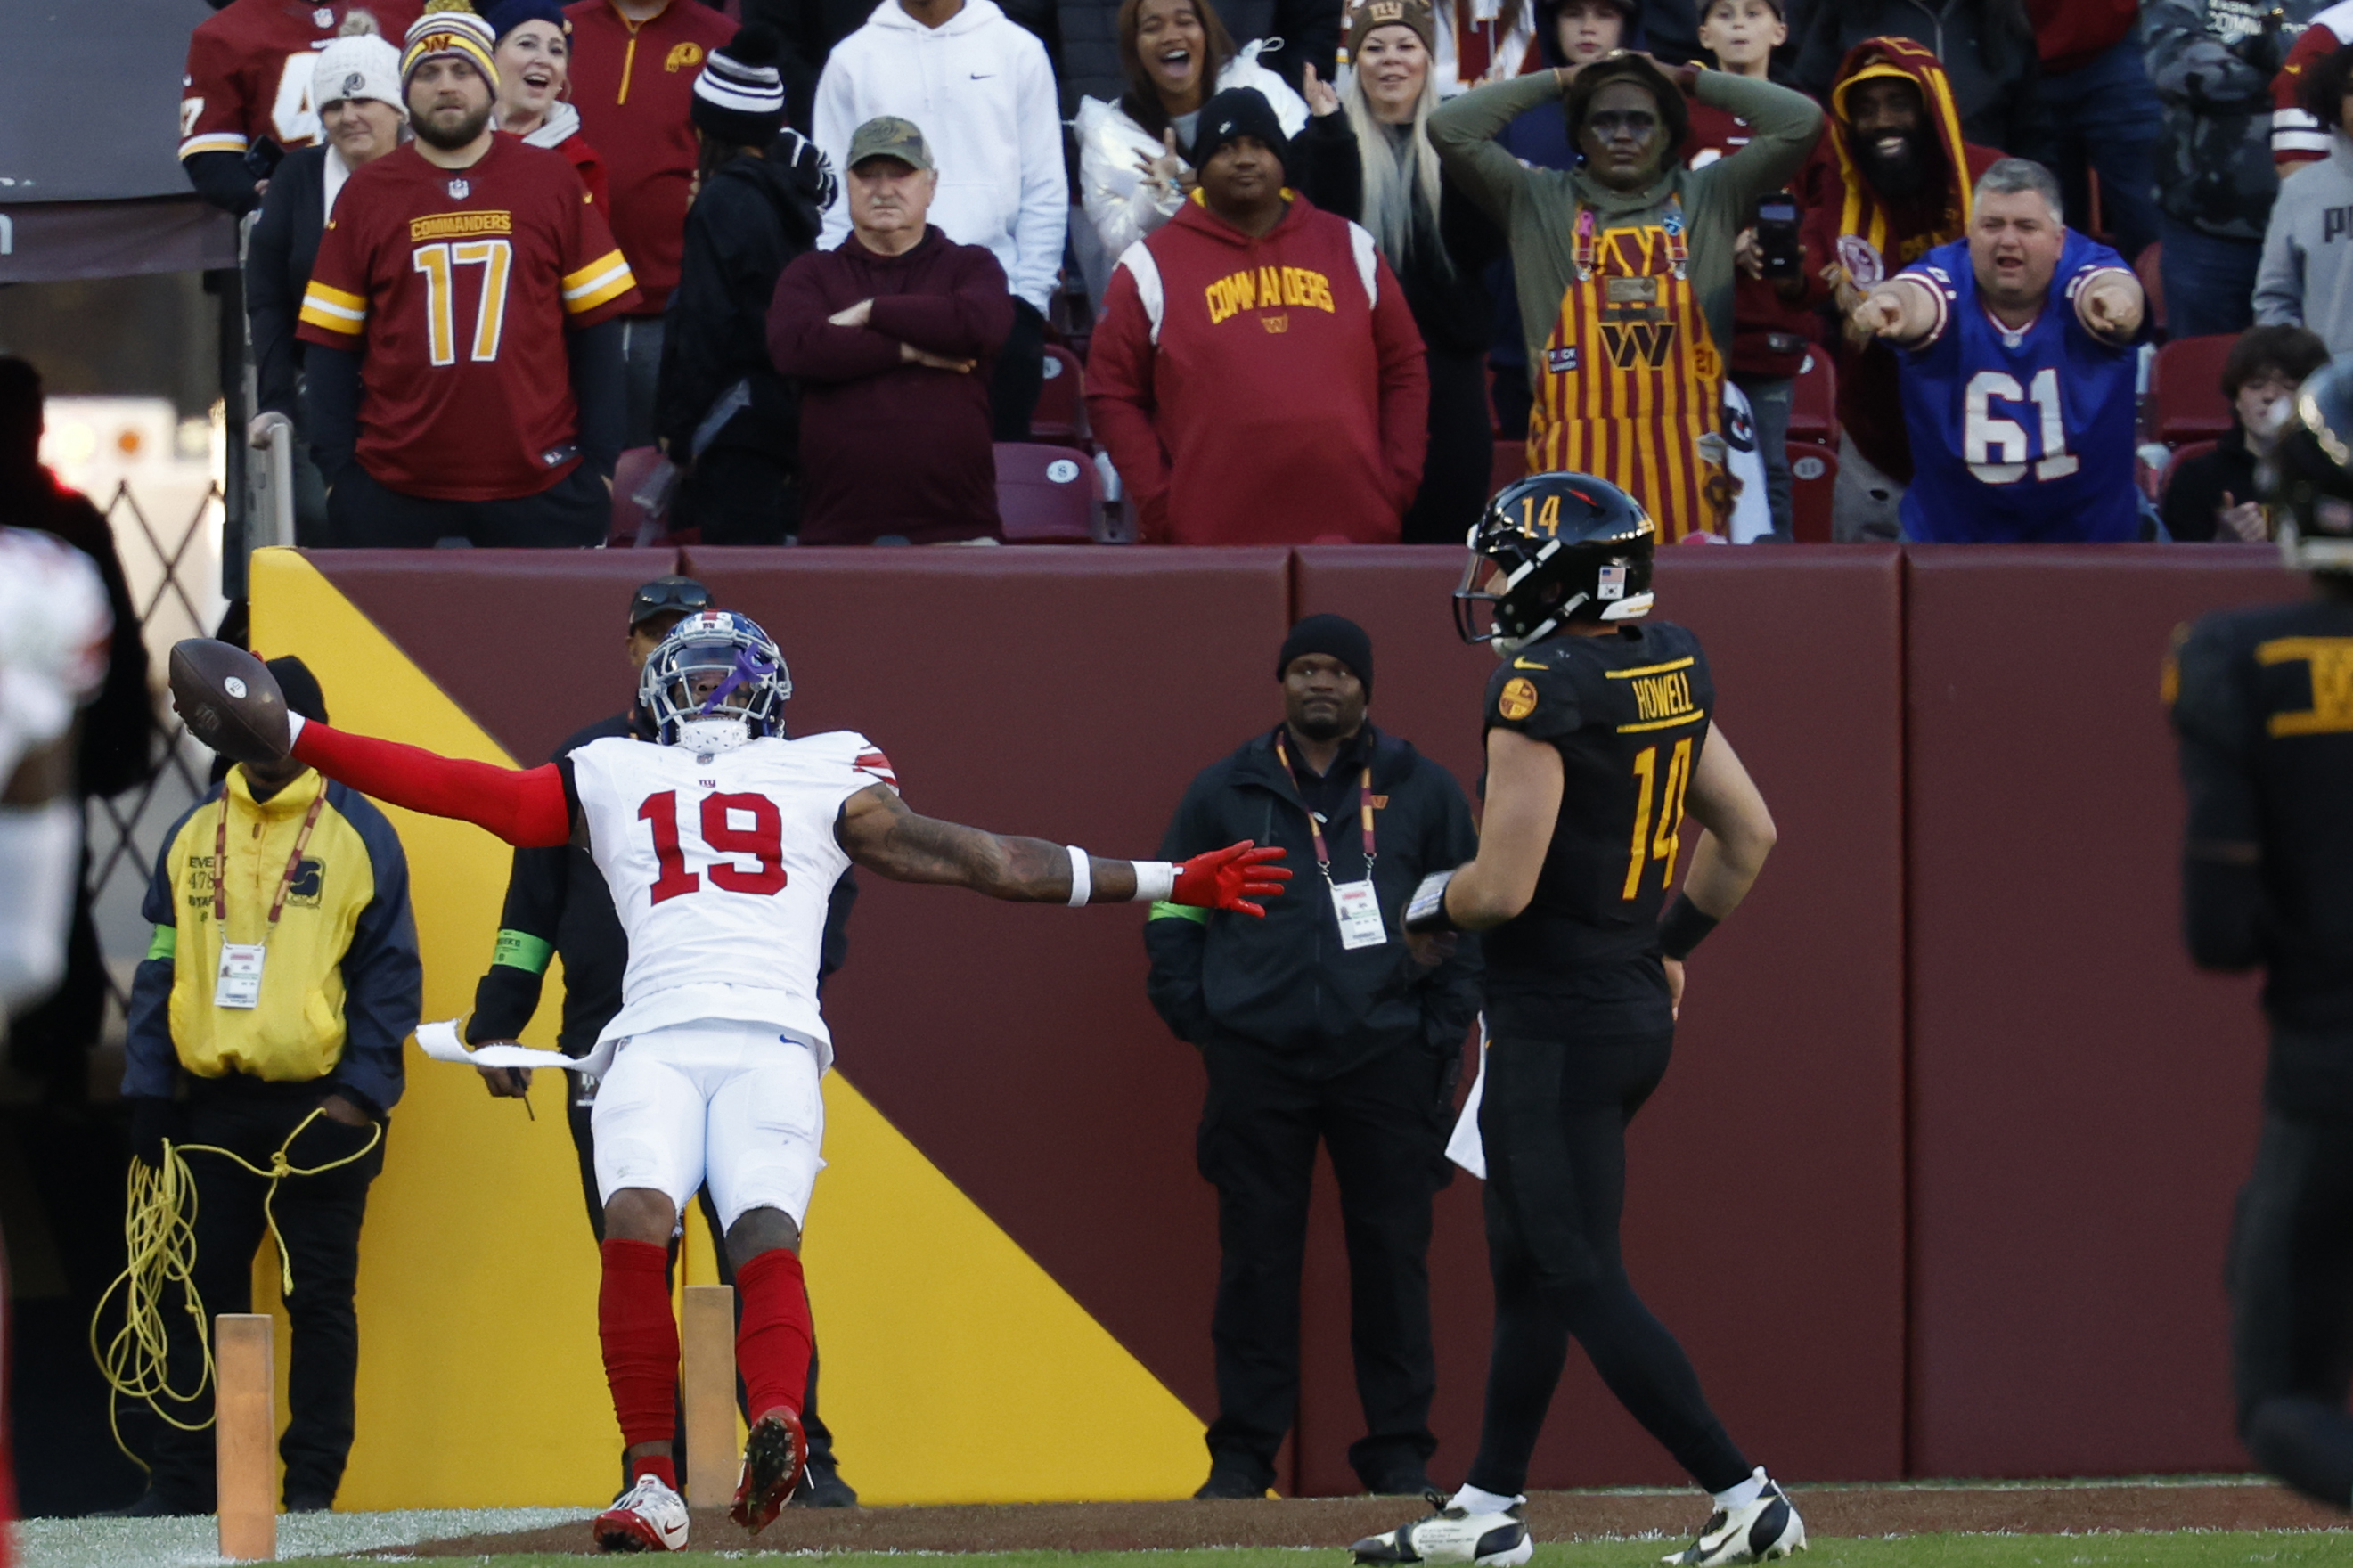 New York Giants safety Isaiah Simmons (19) celebrates while scoring a touchdown on an interception of Washington Commanders quarterback Sam Howell (14) in the final minute during the fourth quarter at FedExField